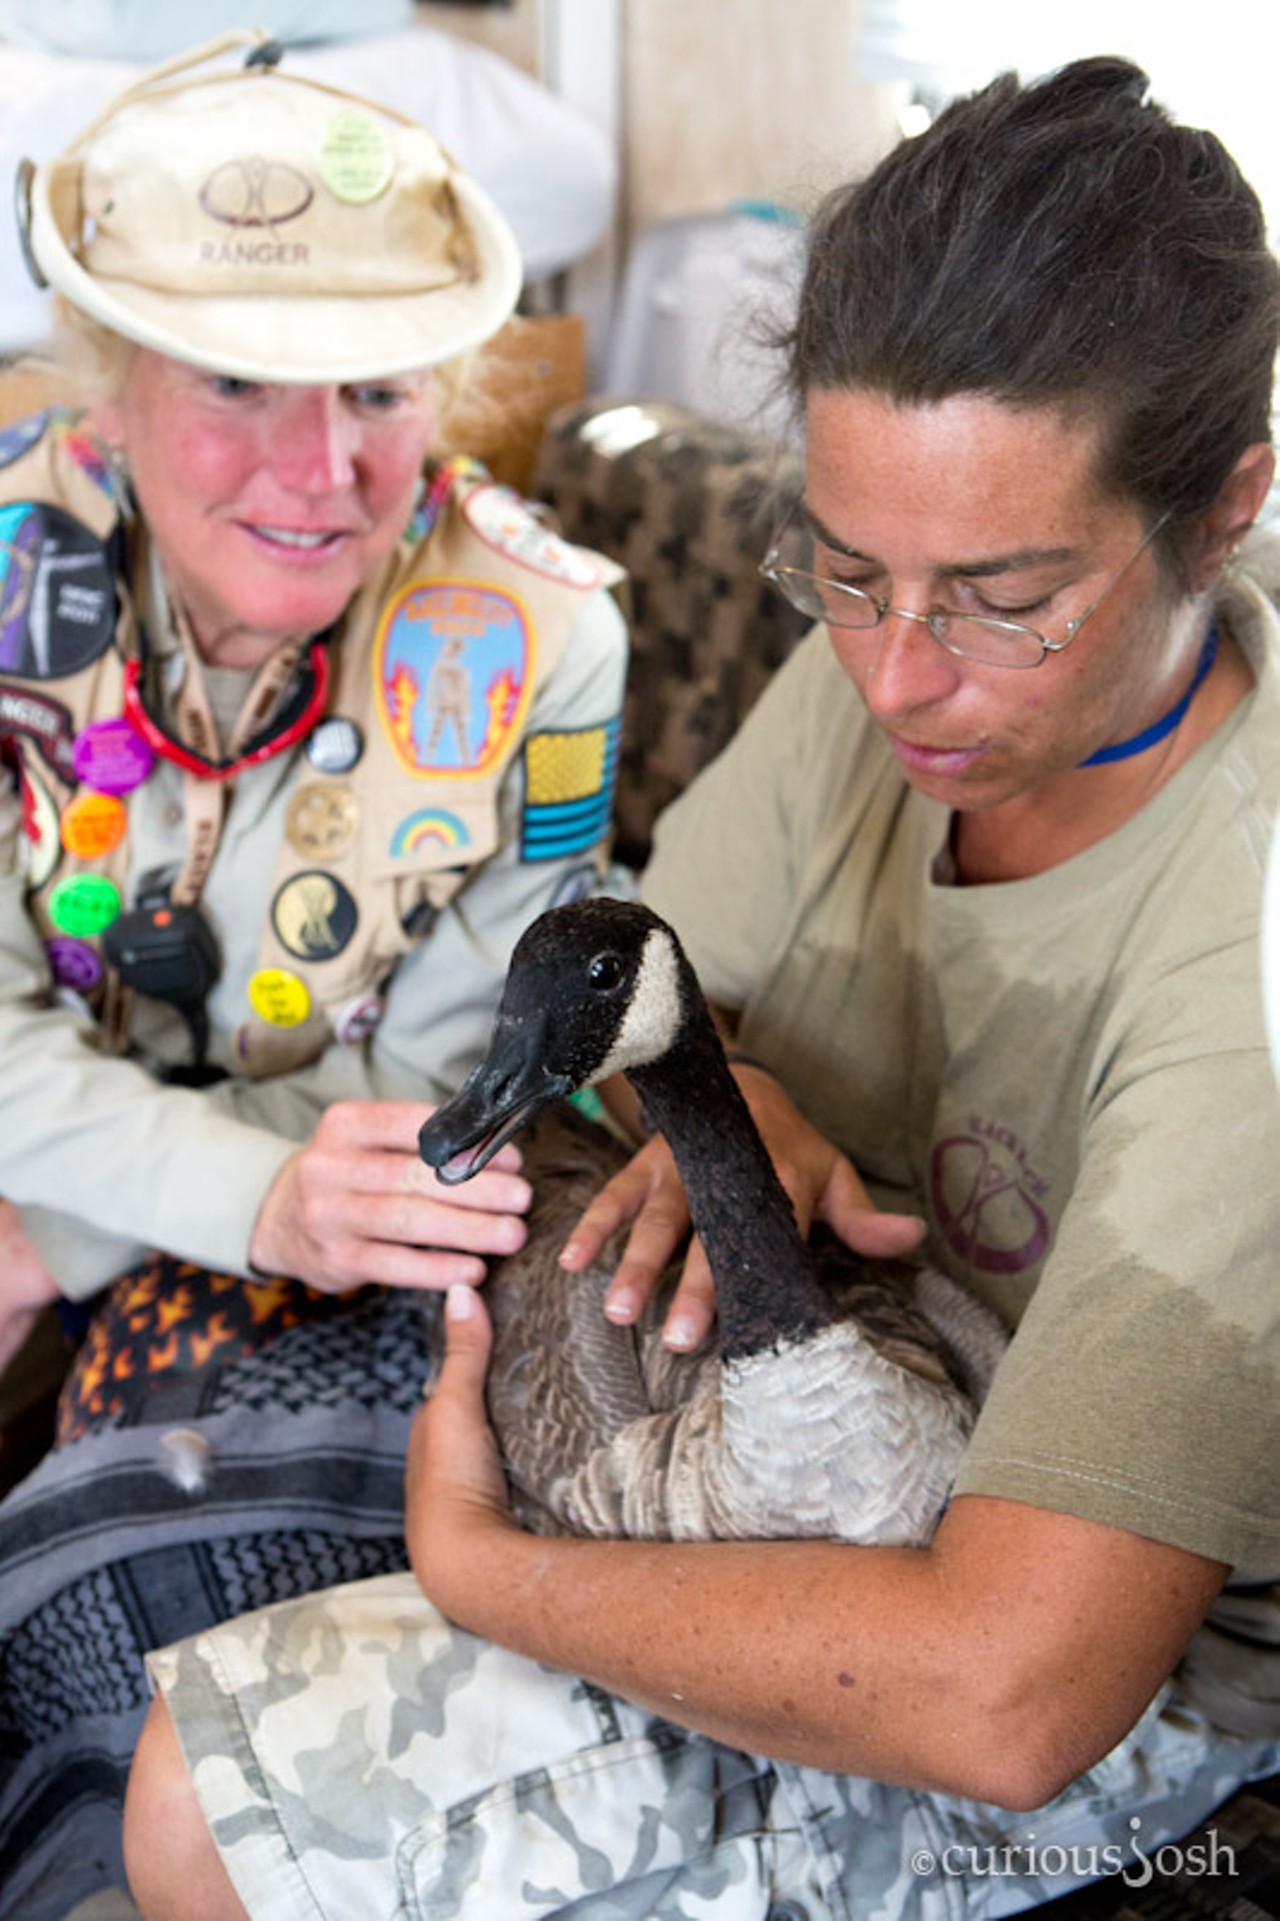 Rangers Beauty and Halston care for the first disoriented and dehydrated goose to land at Burning Man. In a tribute to Ranger diversity, Halston's certified veterinary technician training combined with another Ranger's wild bird handling license allowed for the distraught goose's rehabilitation and safe release back into the wild.